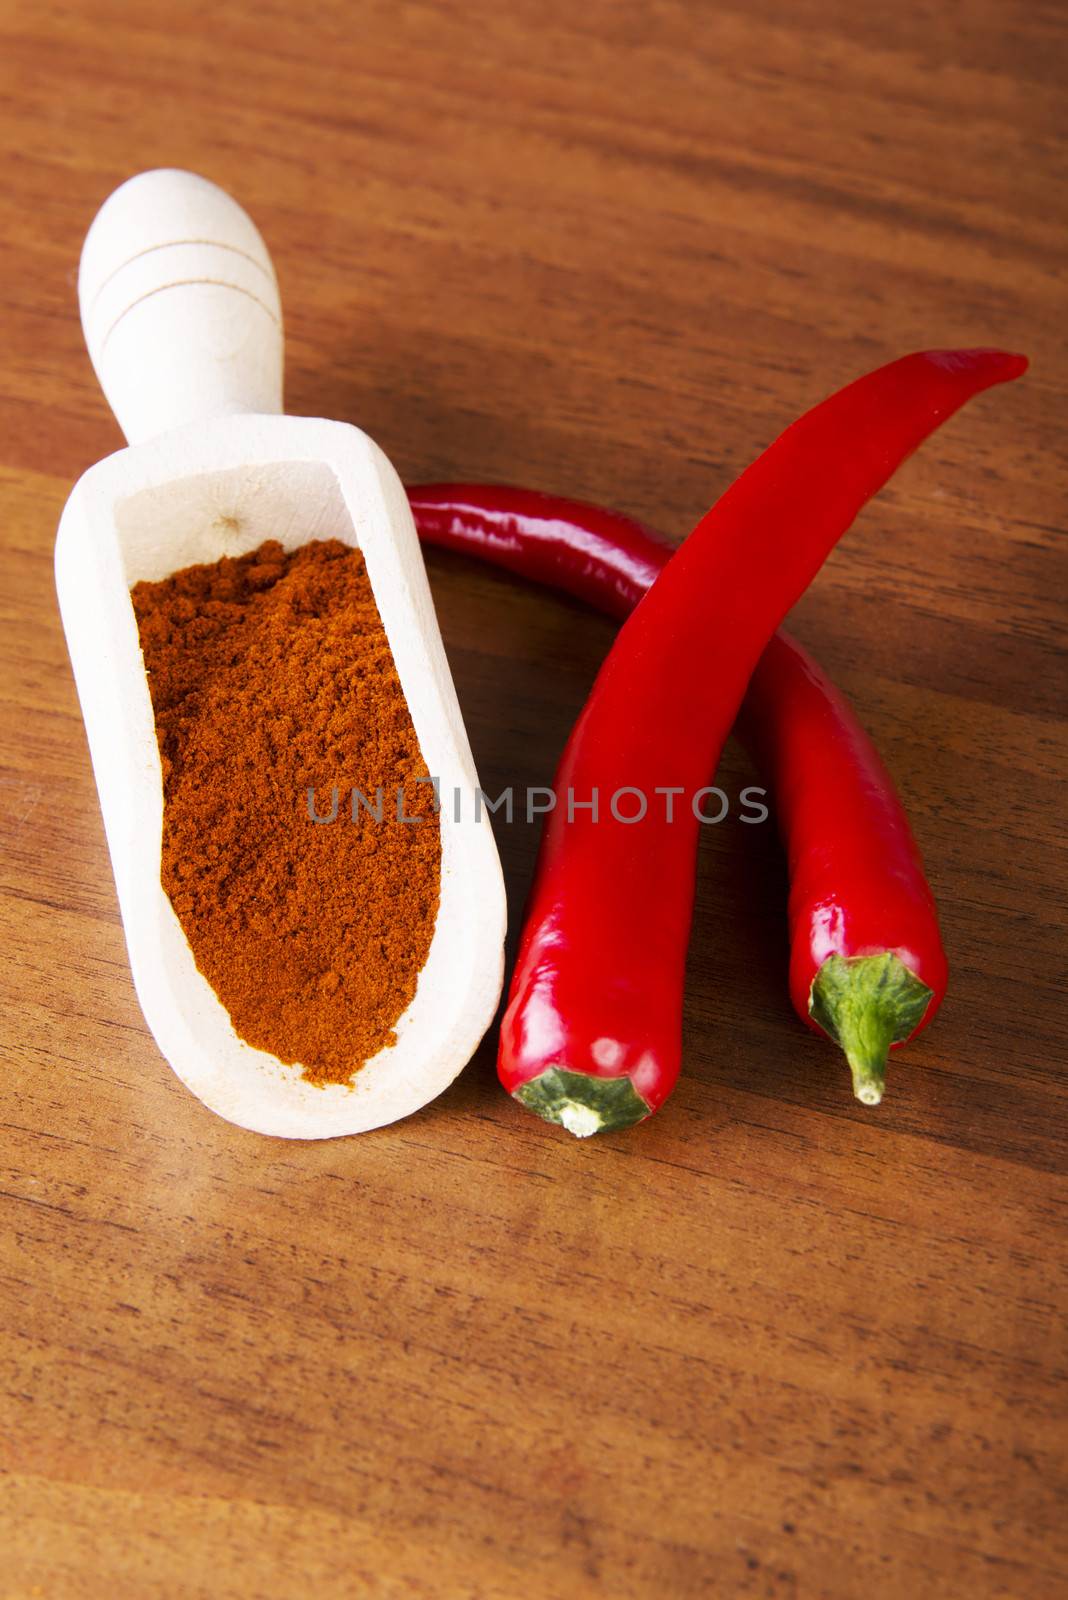 Two chili peppers with paprika spice lying on kitchen table.